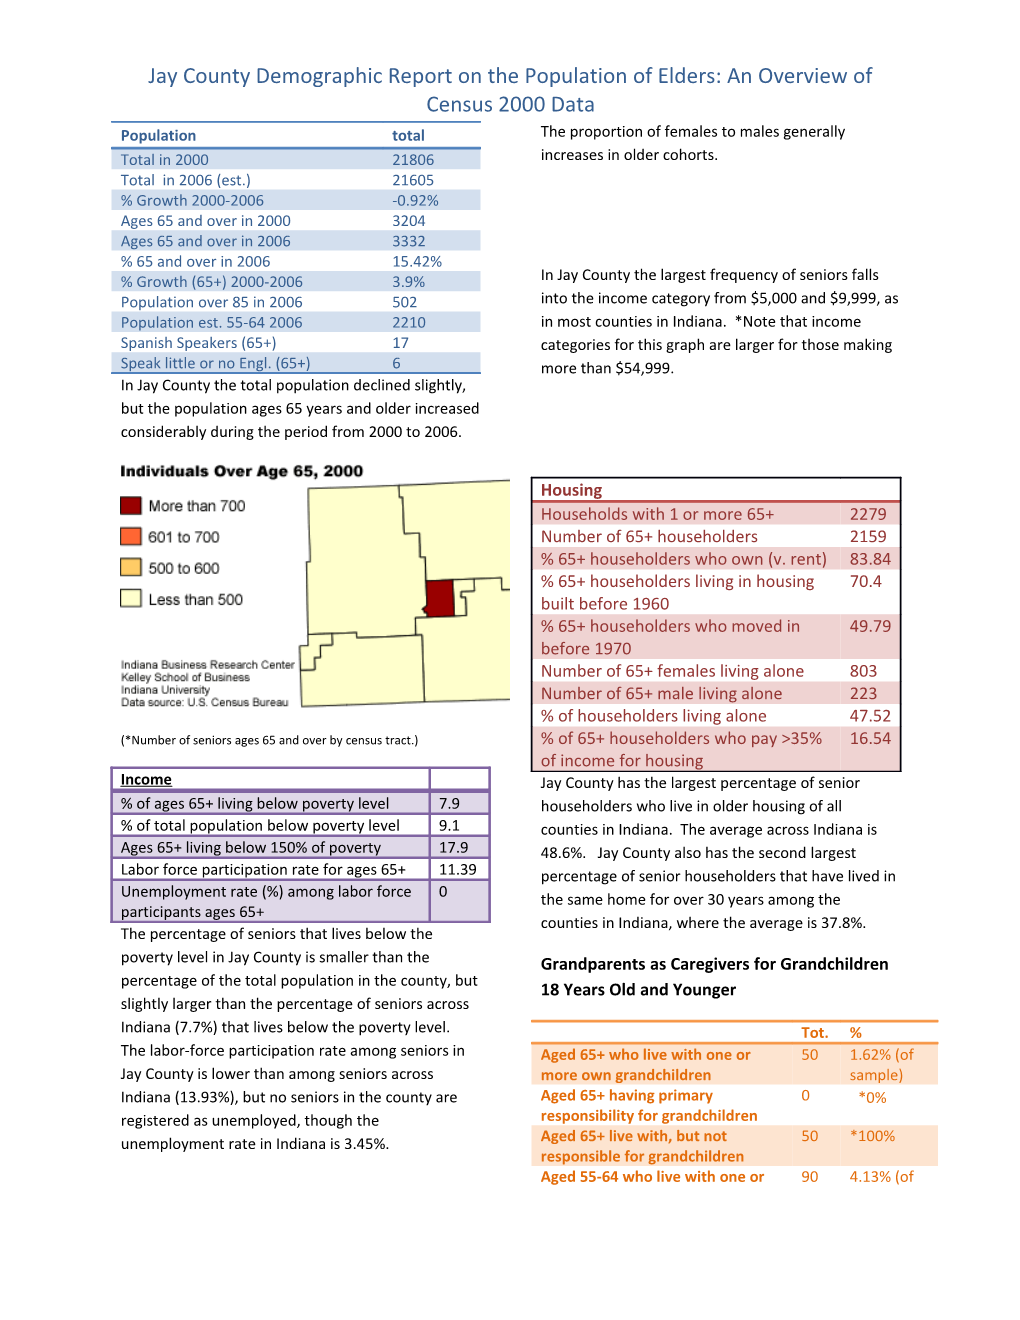 Jay County Demographic Report on the Population of Elders: an Overview of Census 2000 Data